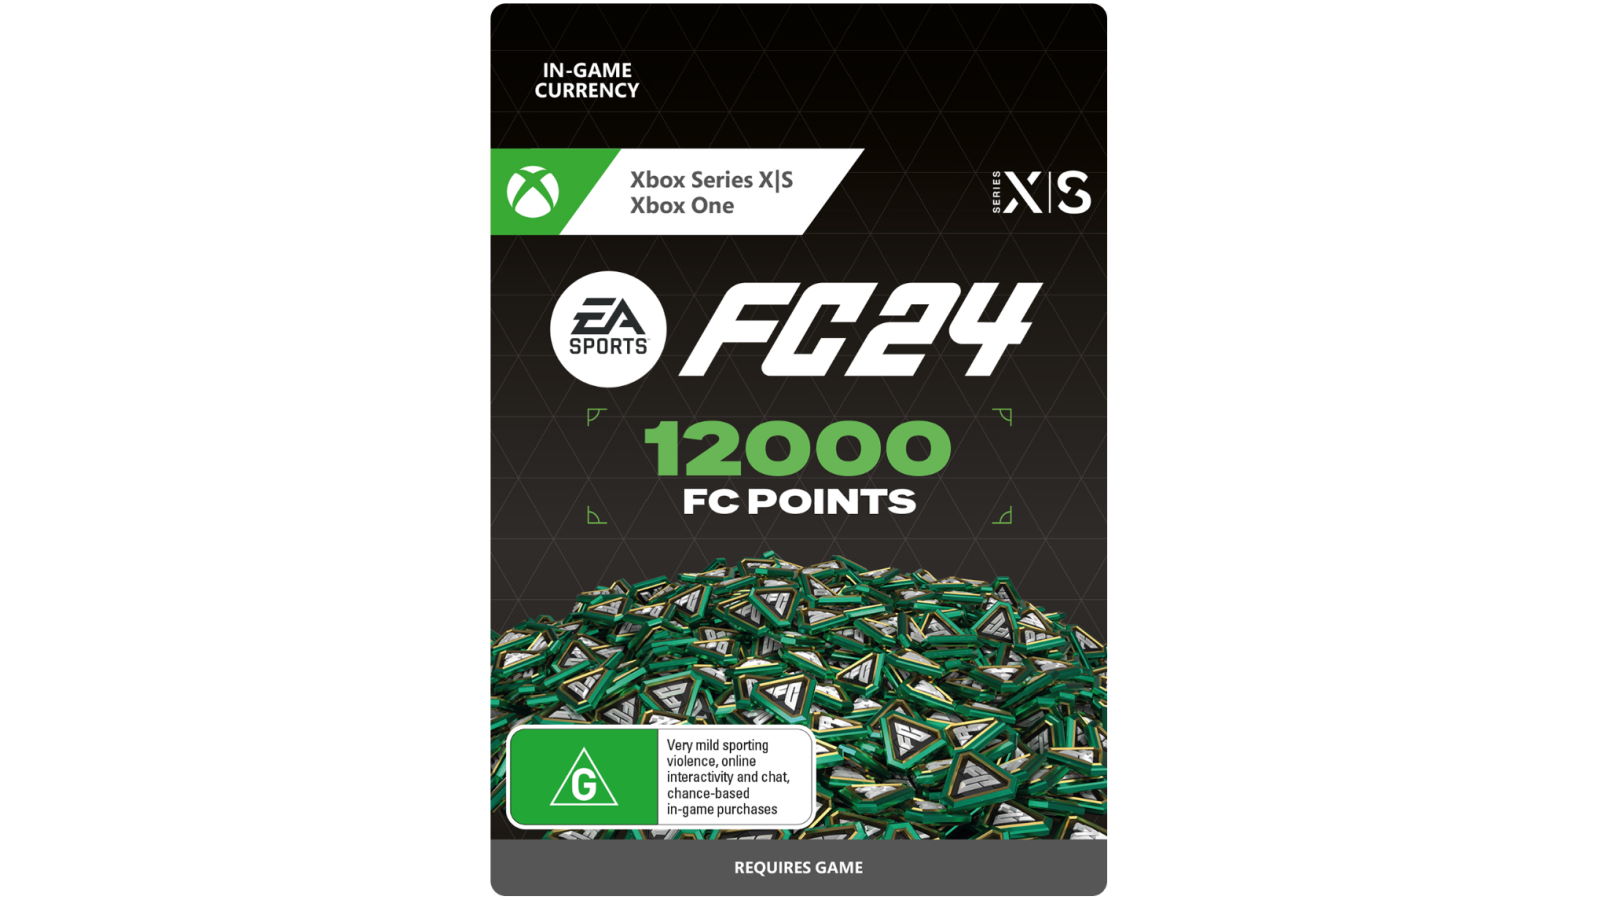 Redeem] Code Ea Sports Fc 24 Standard Edition Xbox in Spintex - Video  Games, Collins Quayson